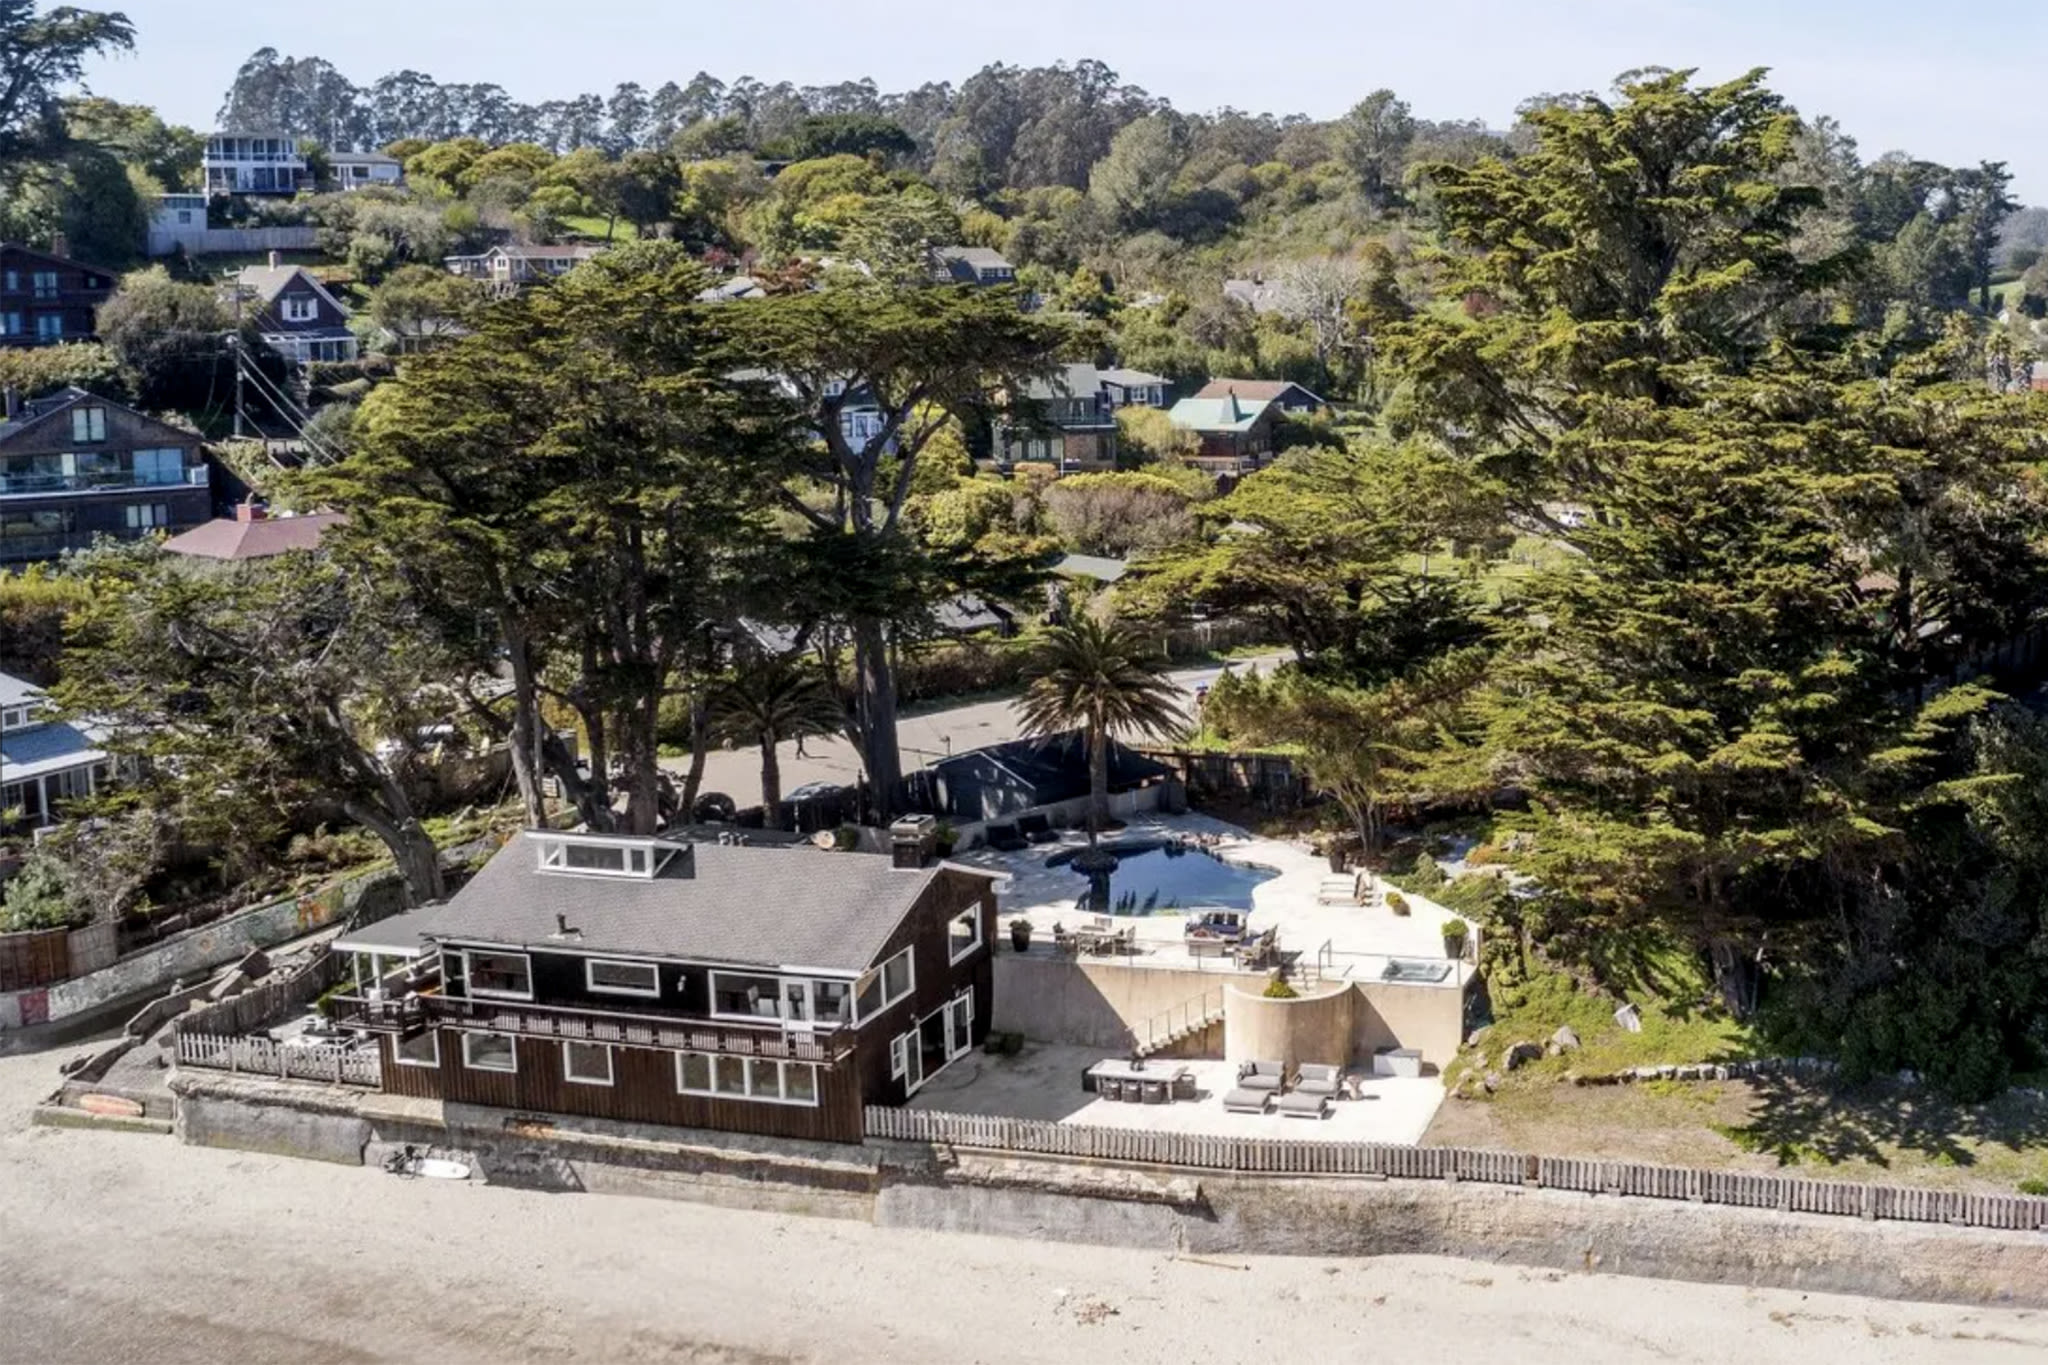 Rock stars' former Bay Area beach house hits market for $15M